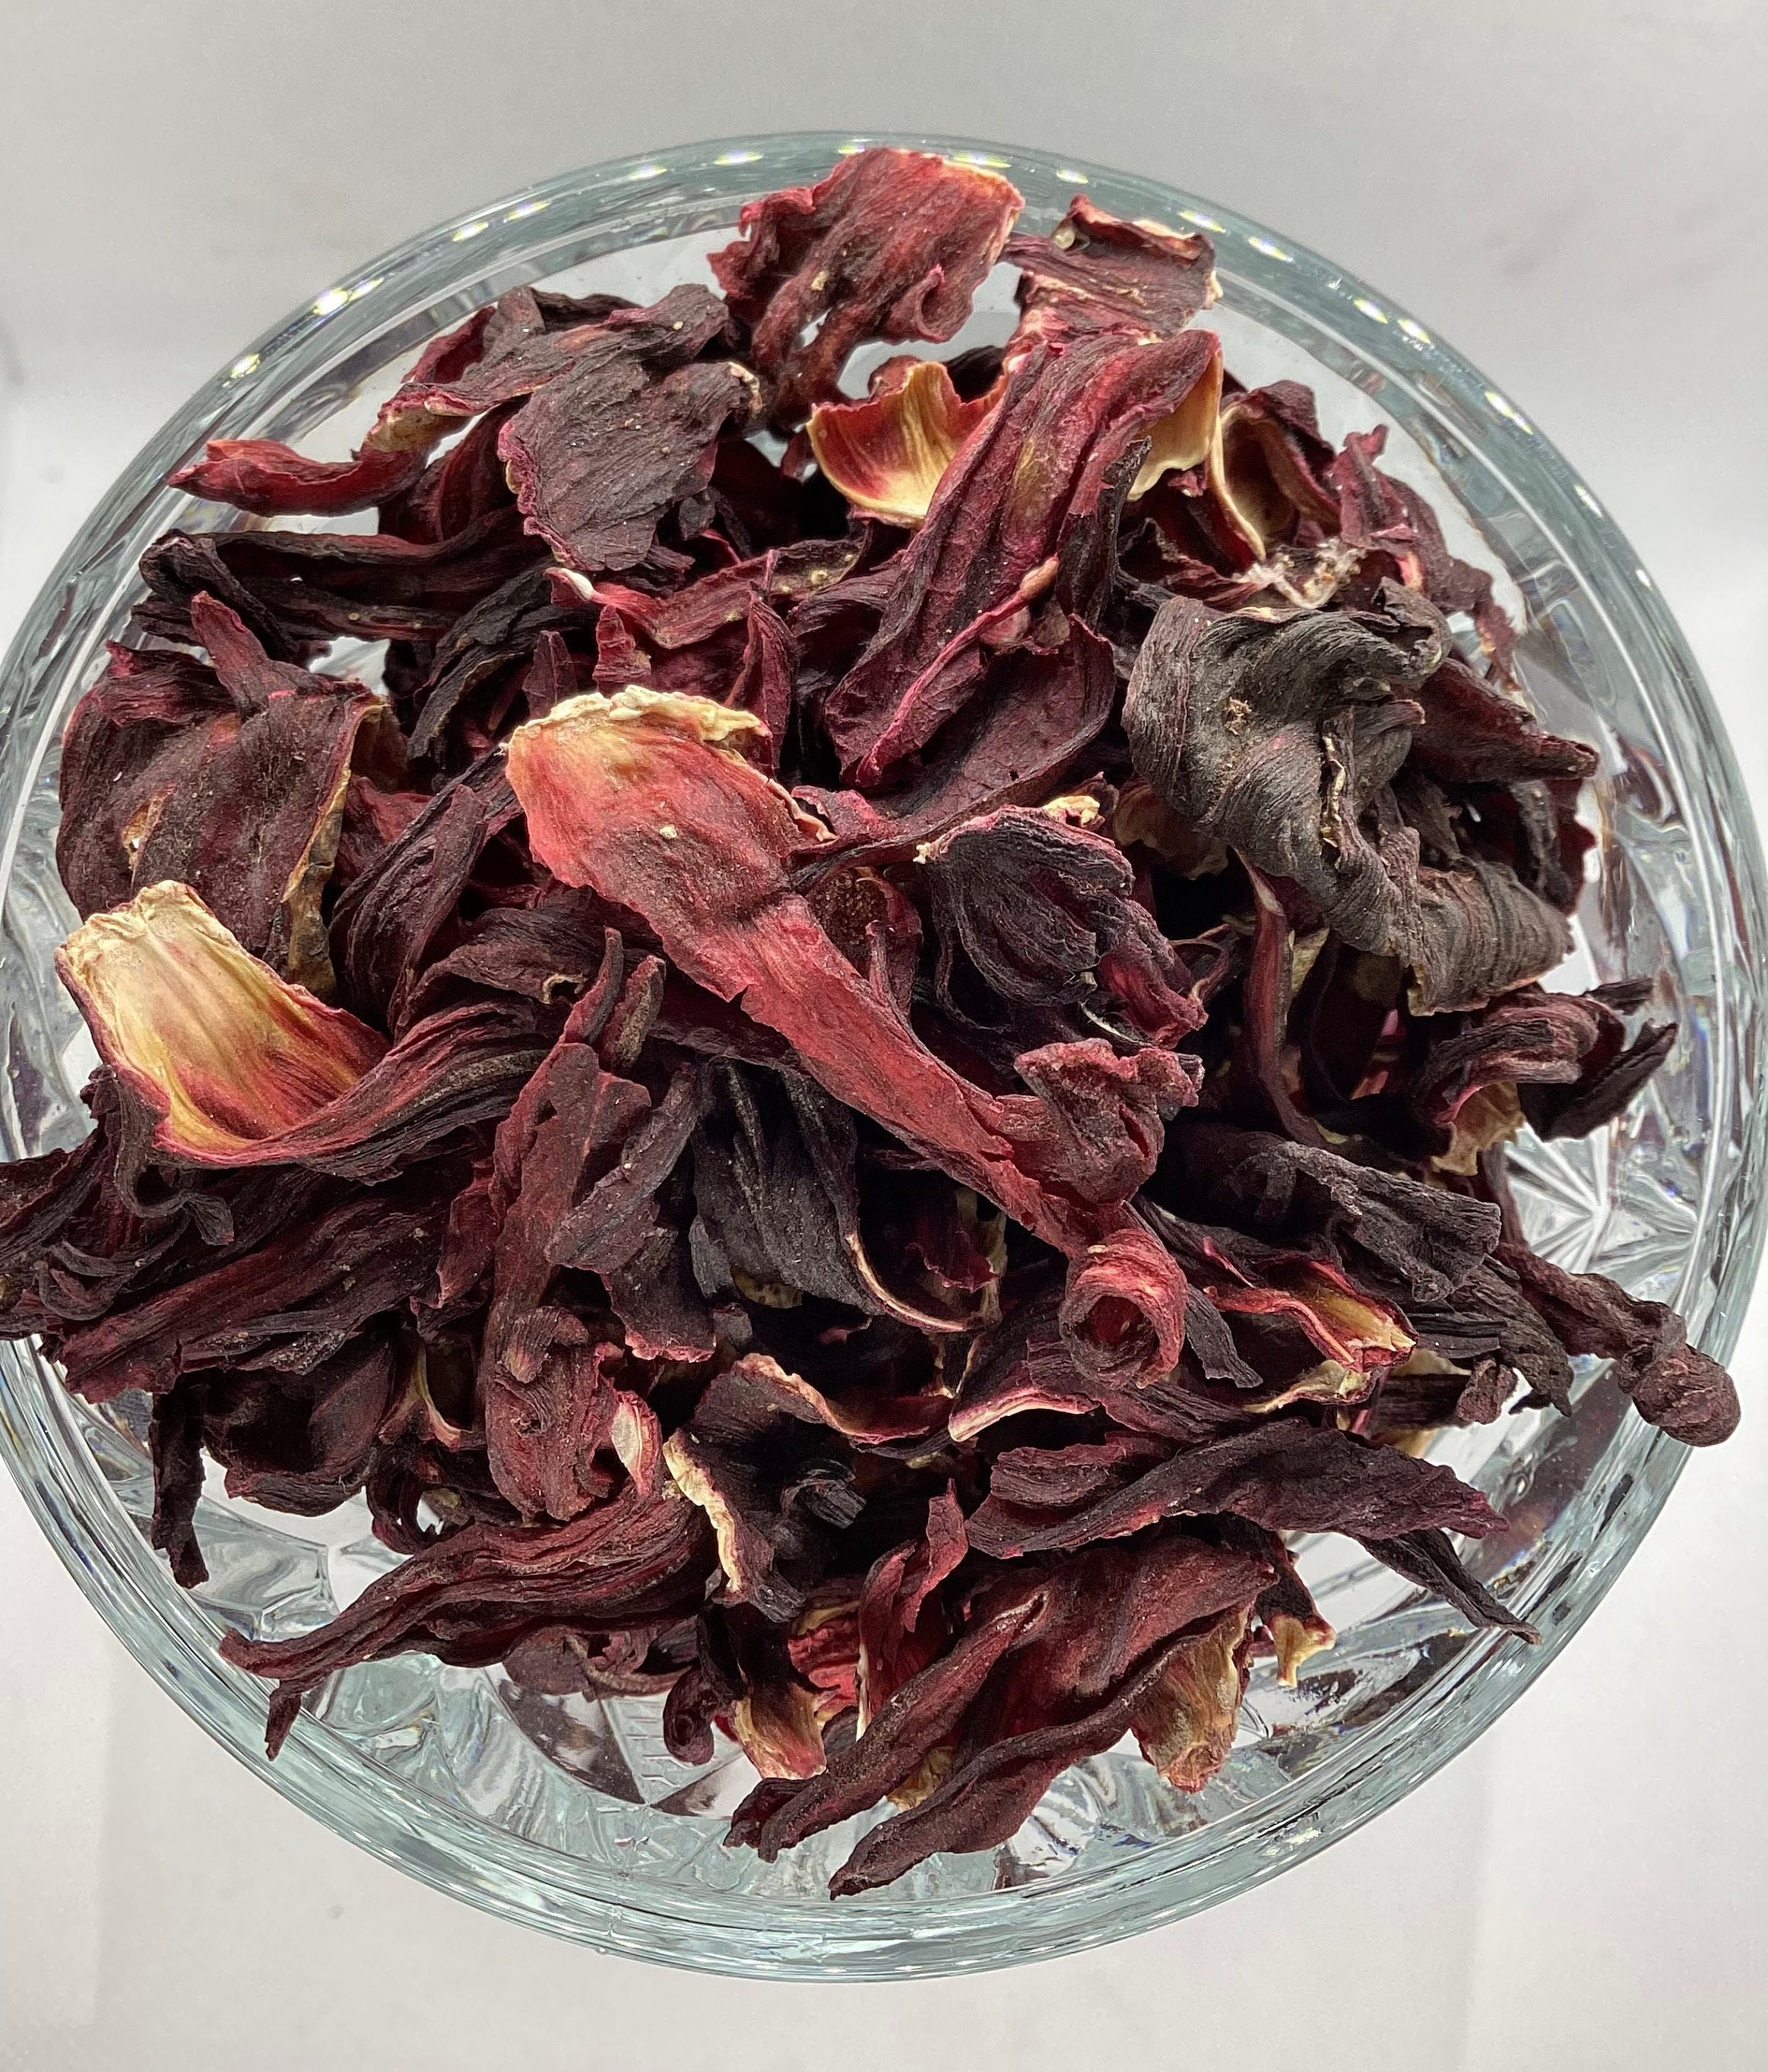 Dried Flowers 54 Types of Botanicals, Edible Flowers, Culinary Grade for  Herbal Tea Cake Decoration Infusion Gin Tonic Dry Edible Petals 